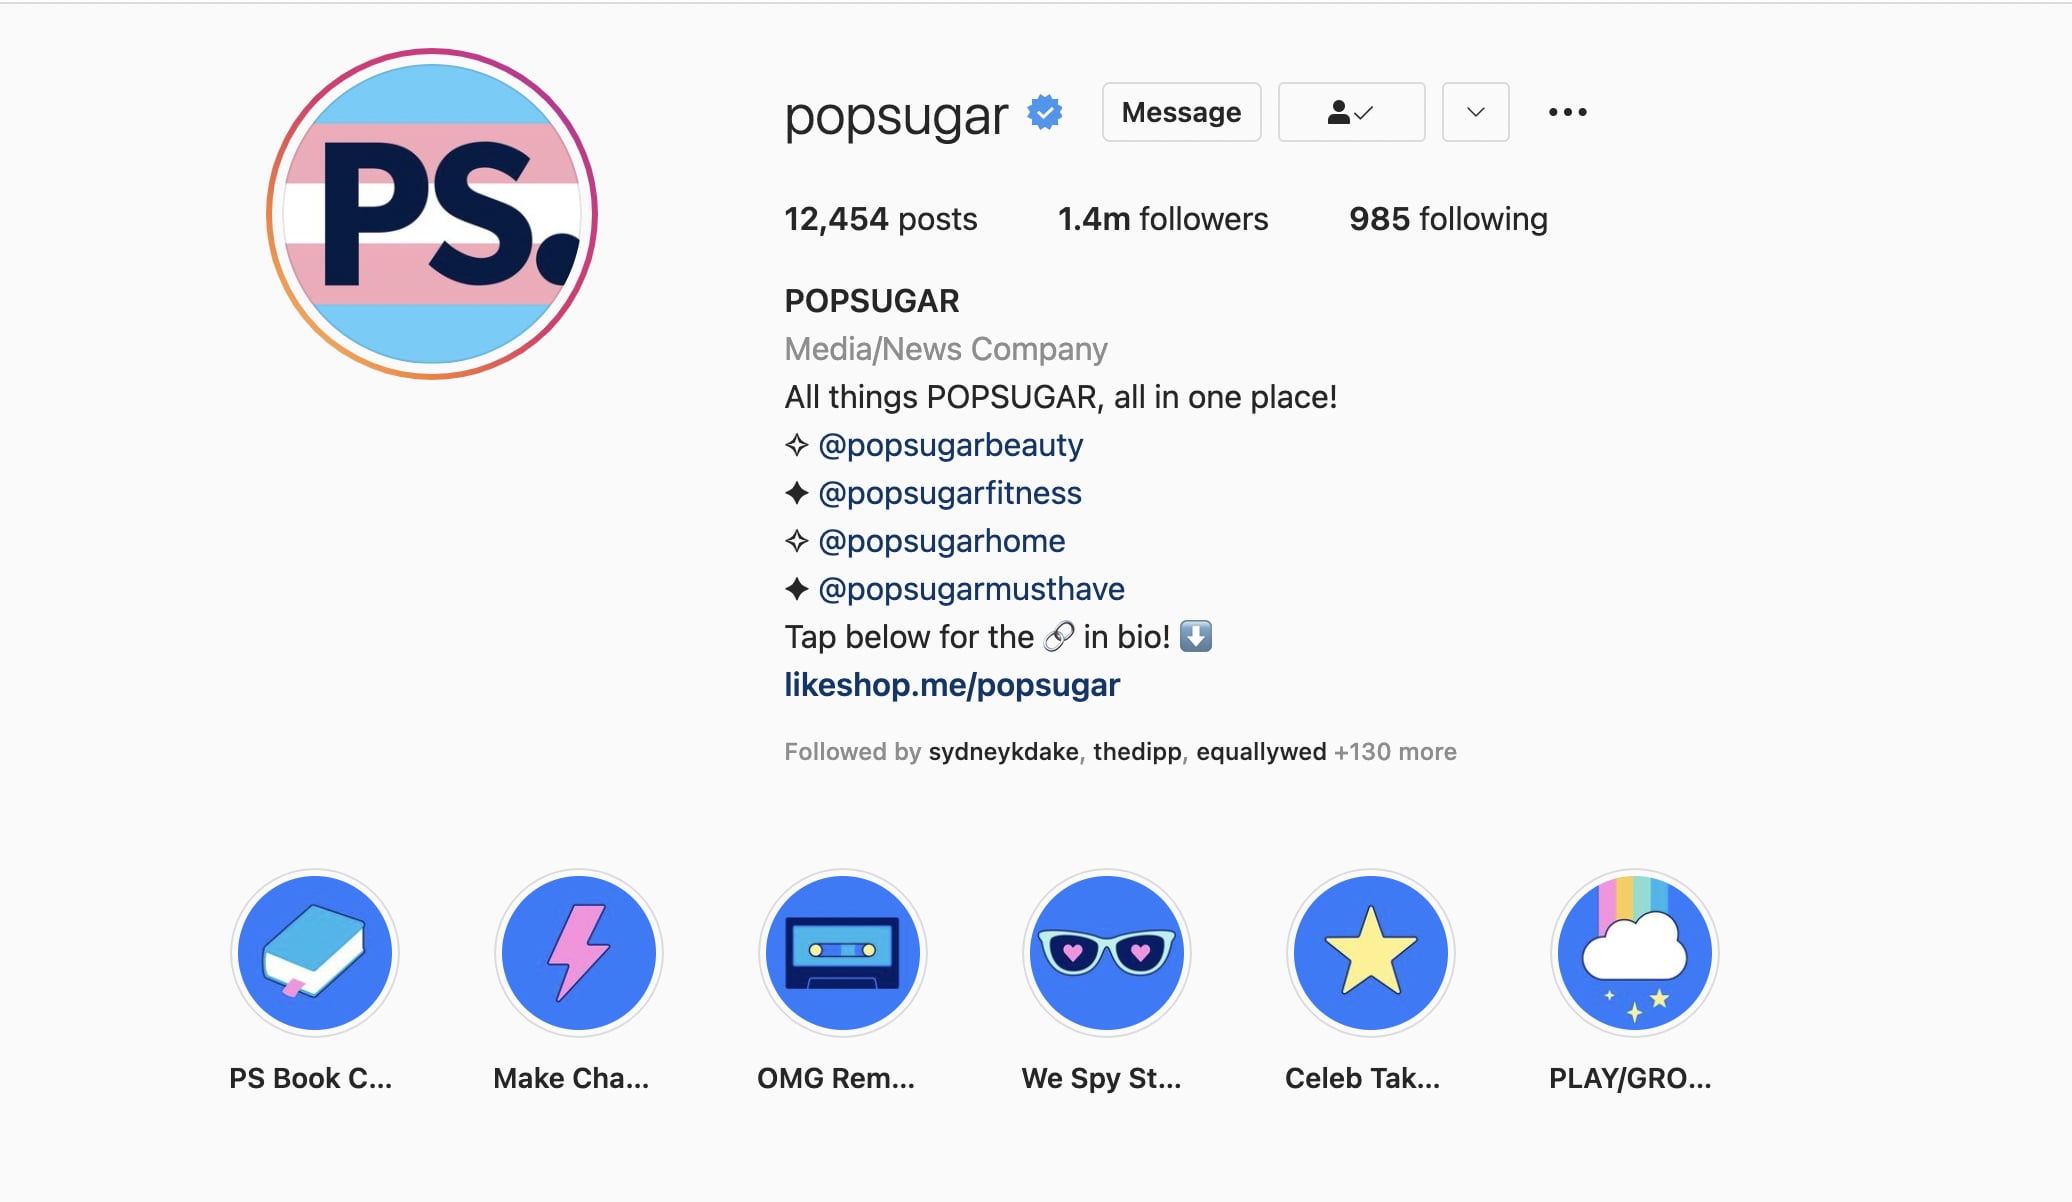 How to Use Instagram Stories Highlights to Wow Your Followers